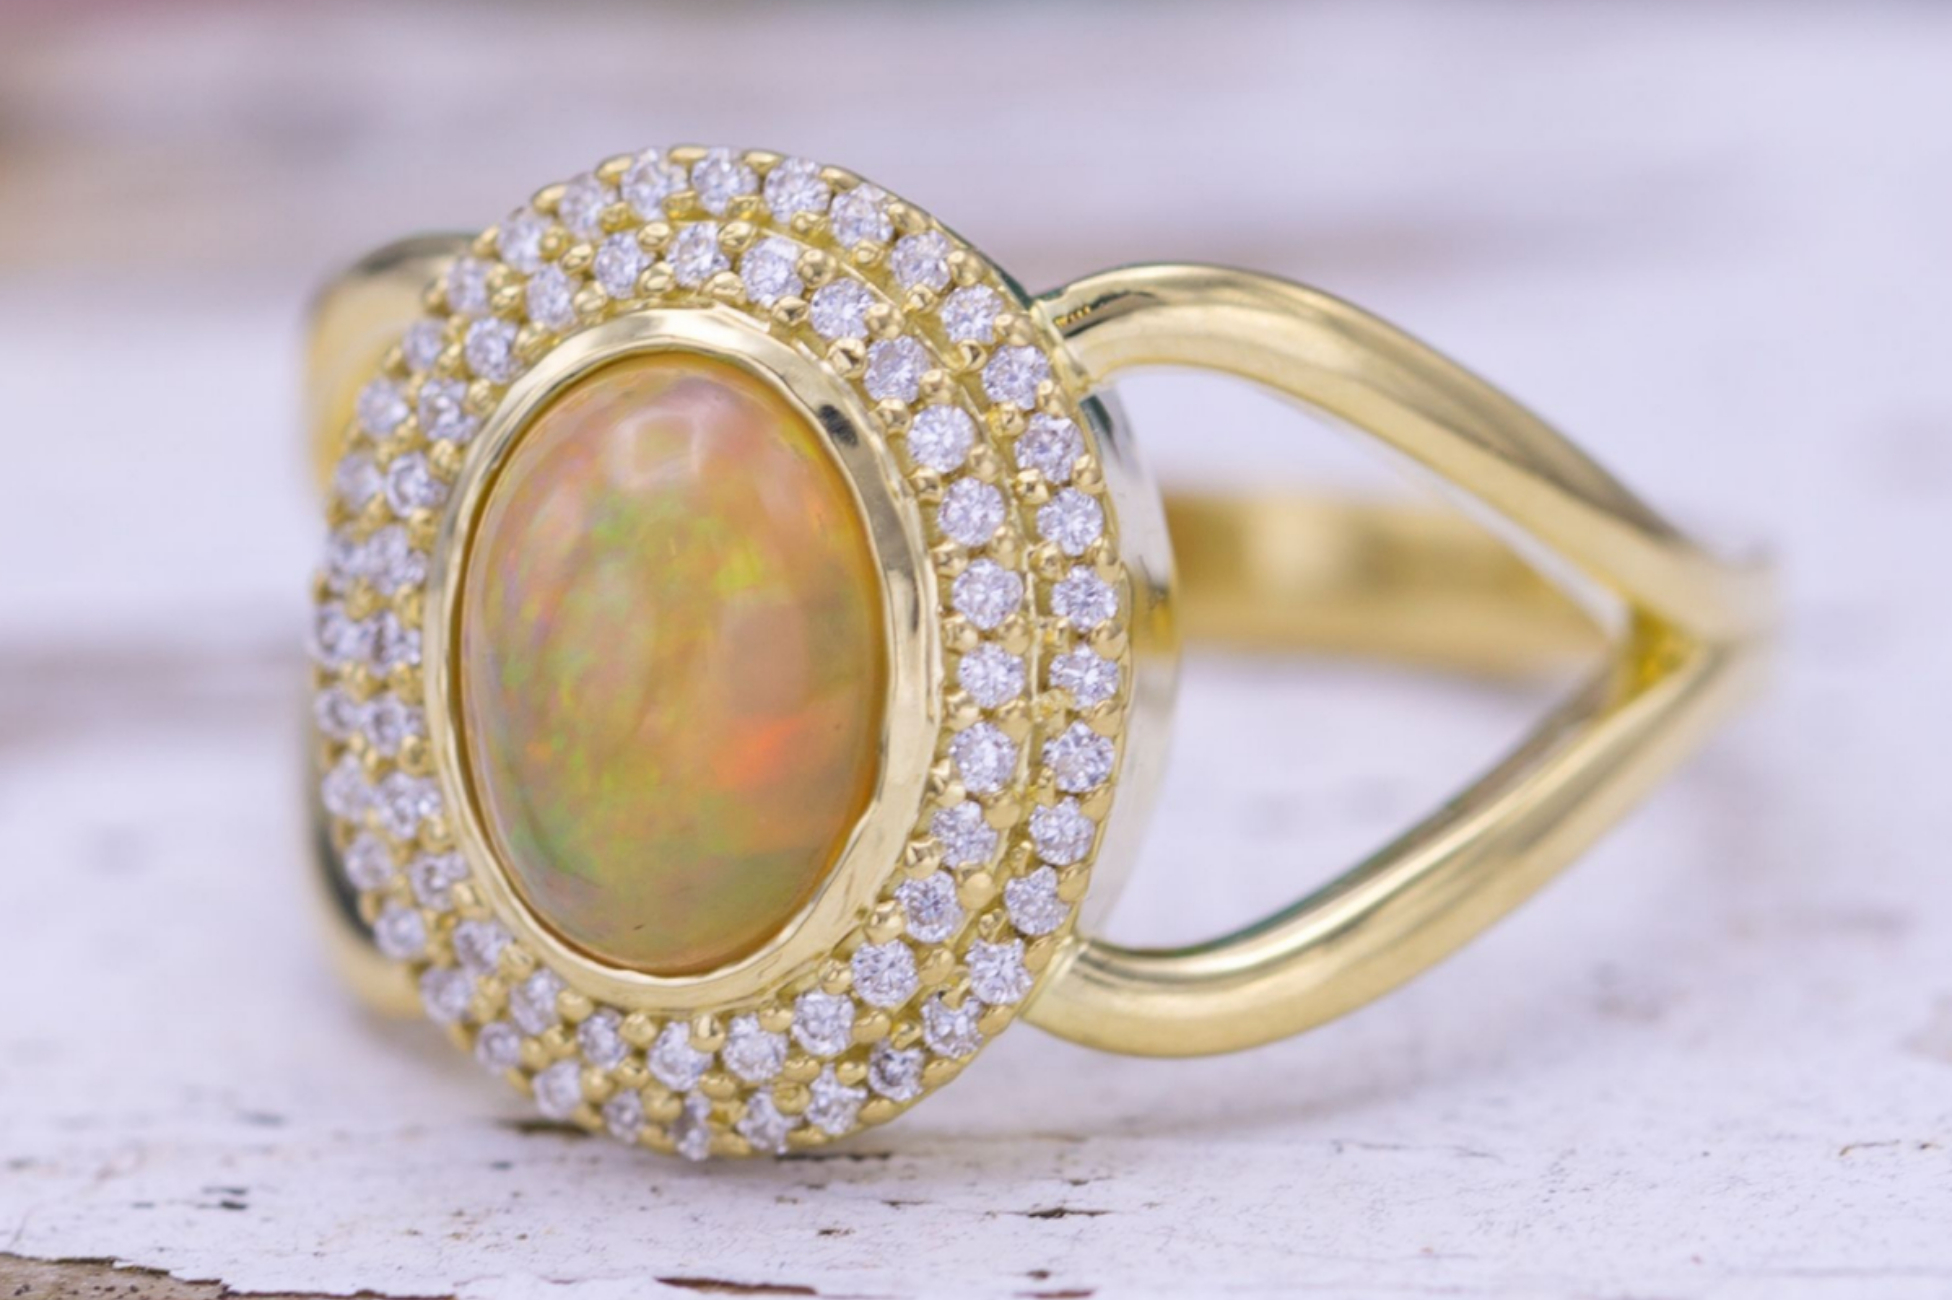 Double halo engagement ring with yellow opal and diamonds